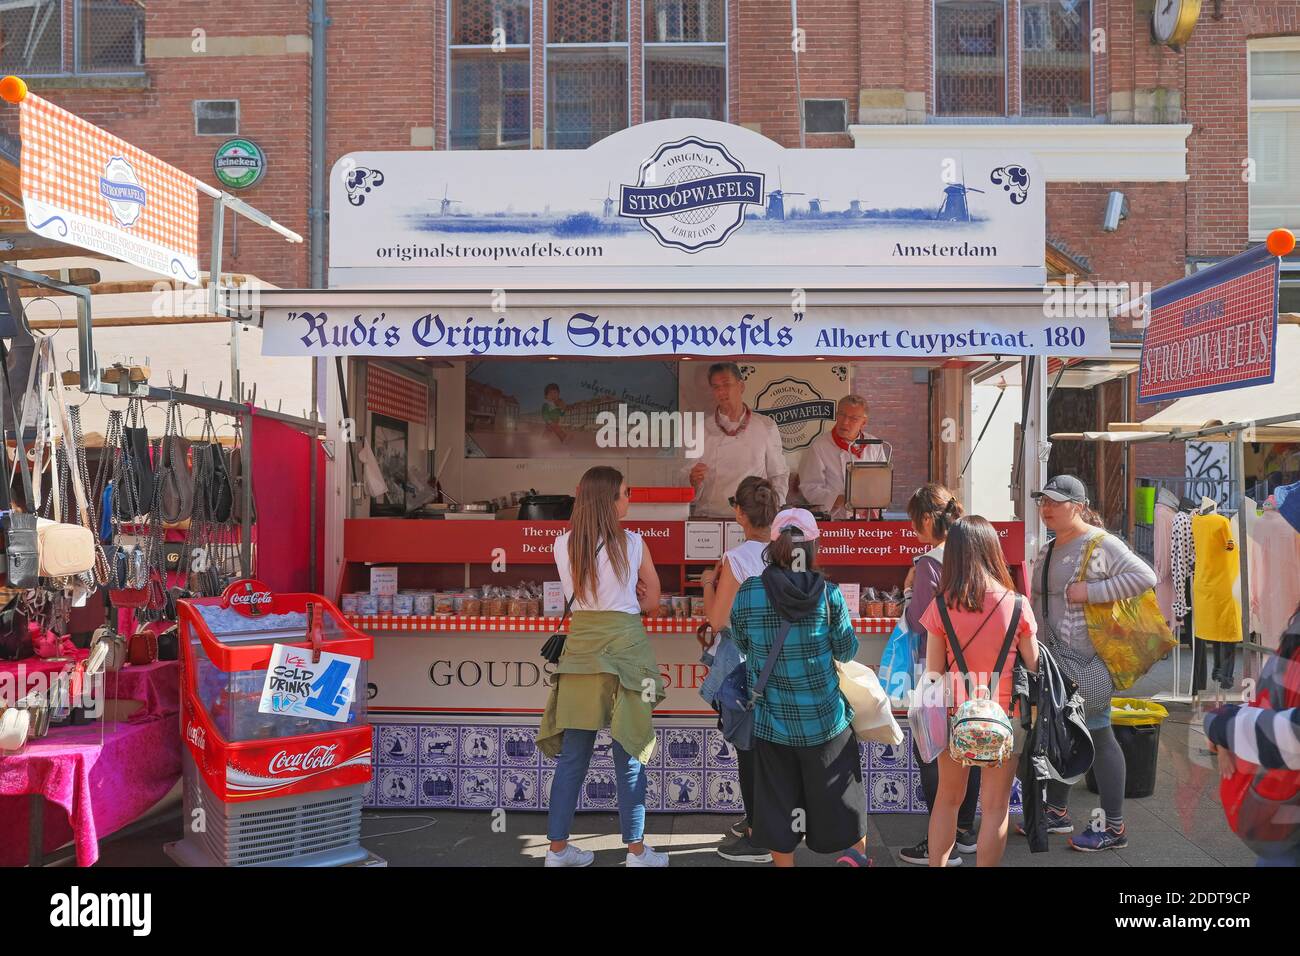 Amsterdam, Netherlands - May 15, 2018: People Waiting for Famous Stroopwafels at Street Market in Amsterdam, Holland. Stock Photo